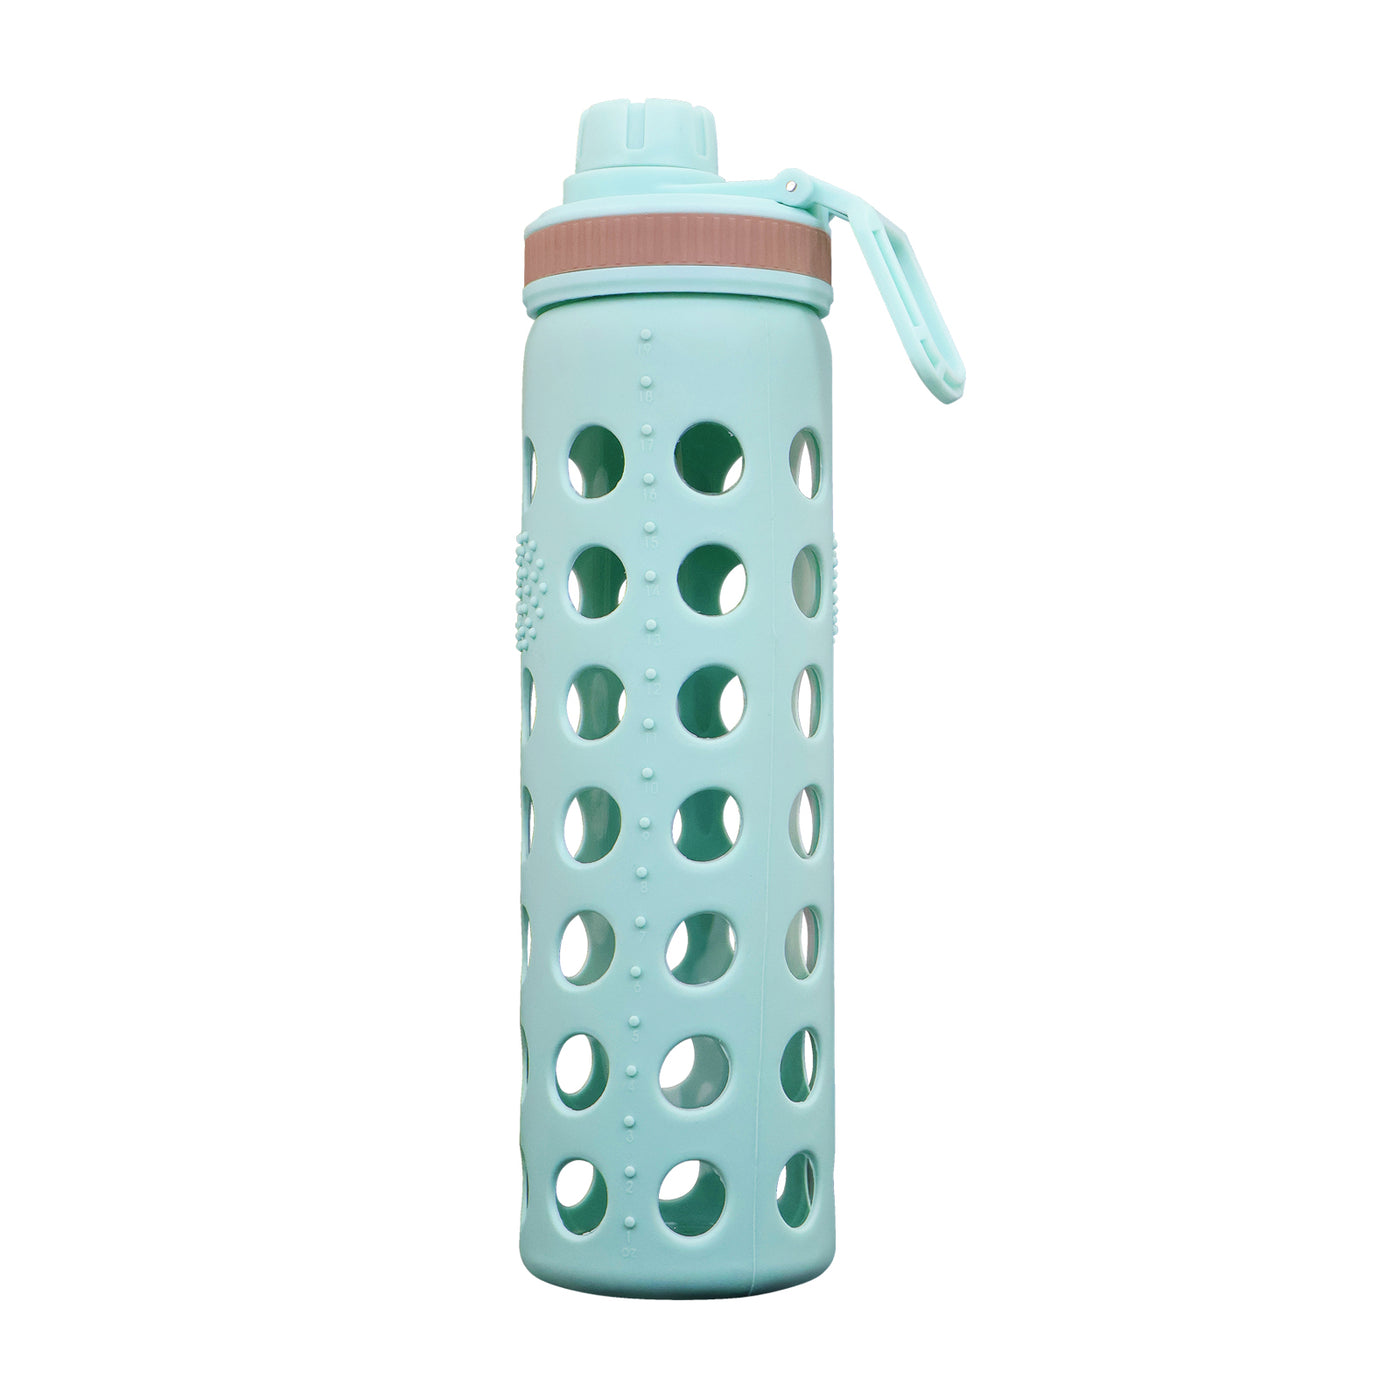 20oz Clear Glass Water Bottles Extra Lid Reusable Fitness Sports Bottle, Cyan